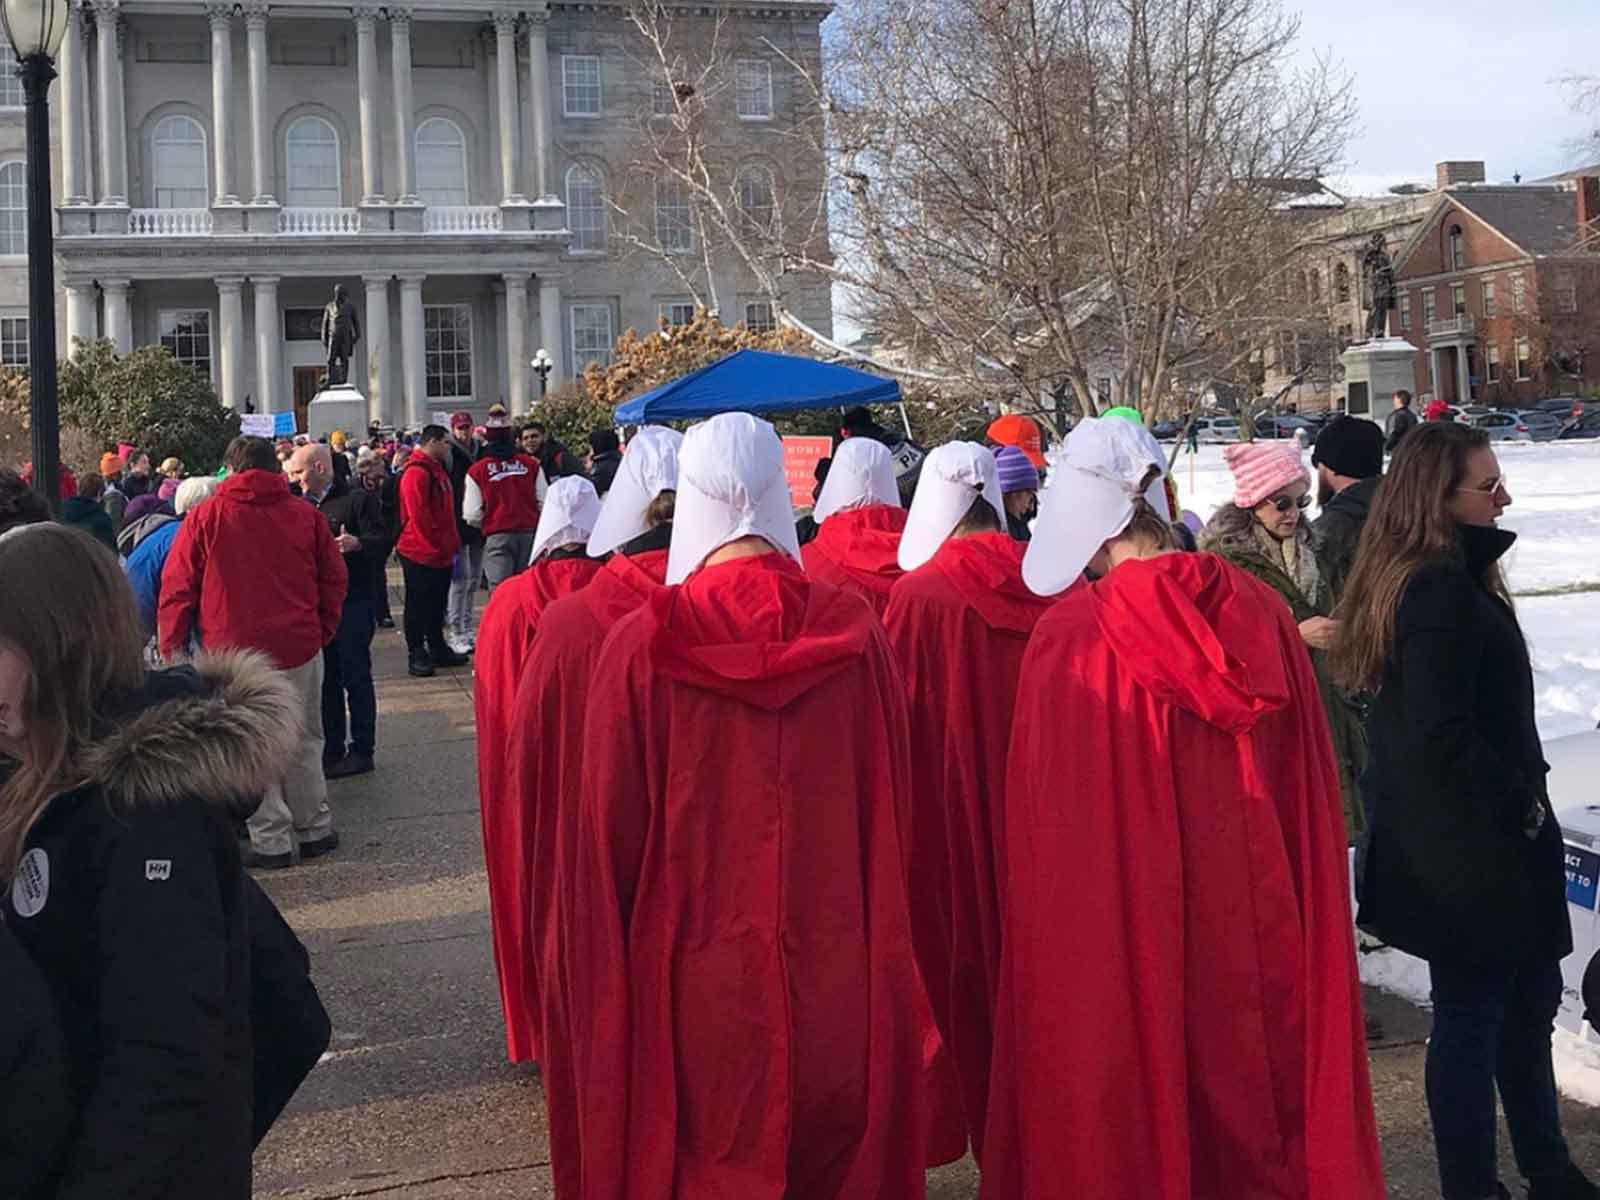 ‘Handmaid’s Tale’ Outfits at Women’s March Send Powerful Message